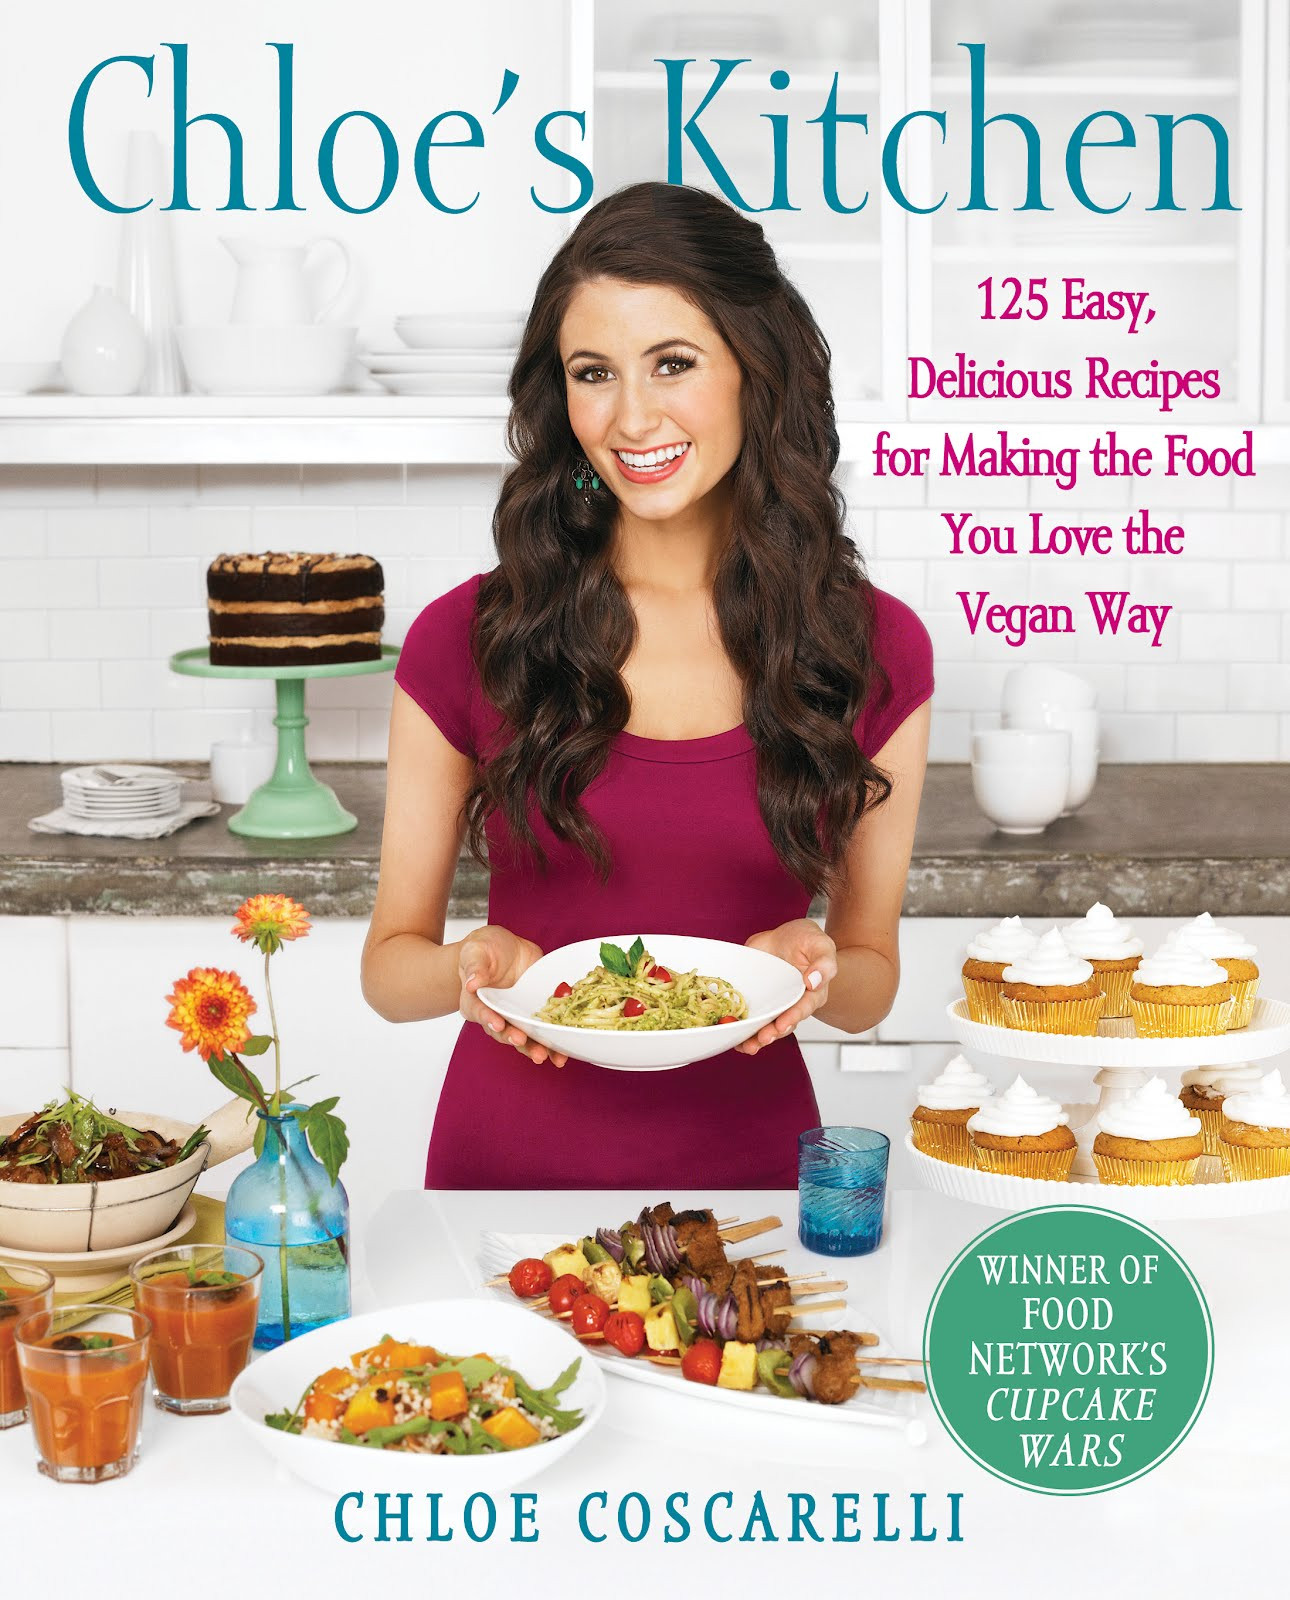 Vegan Chef Recipes
 Bite Upon Bite Vegan Cooking with Chloe Coscarelli and a